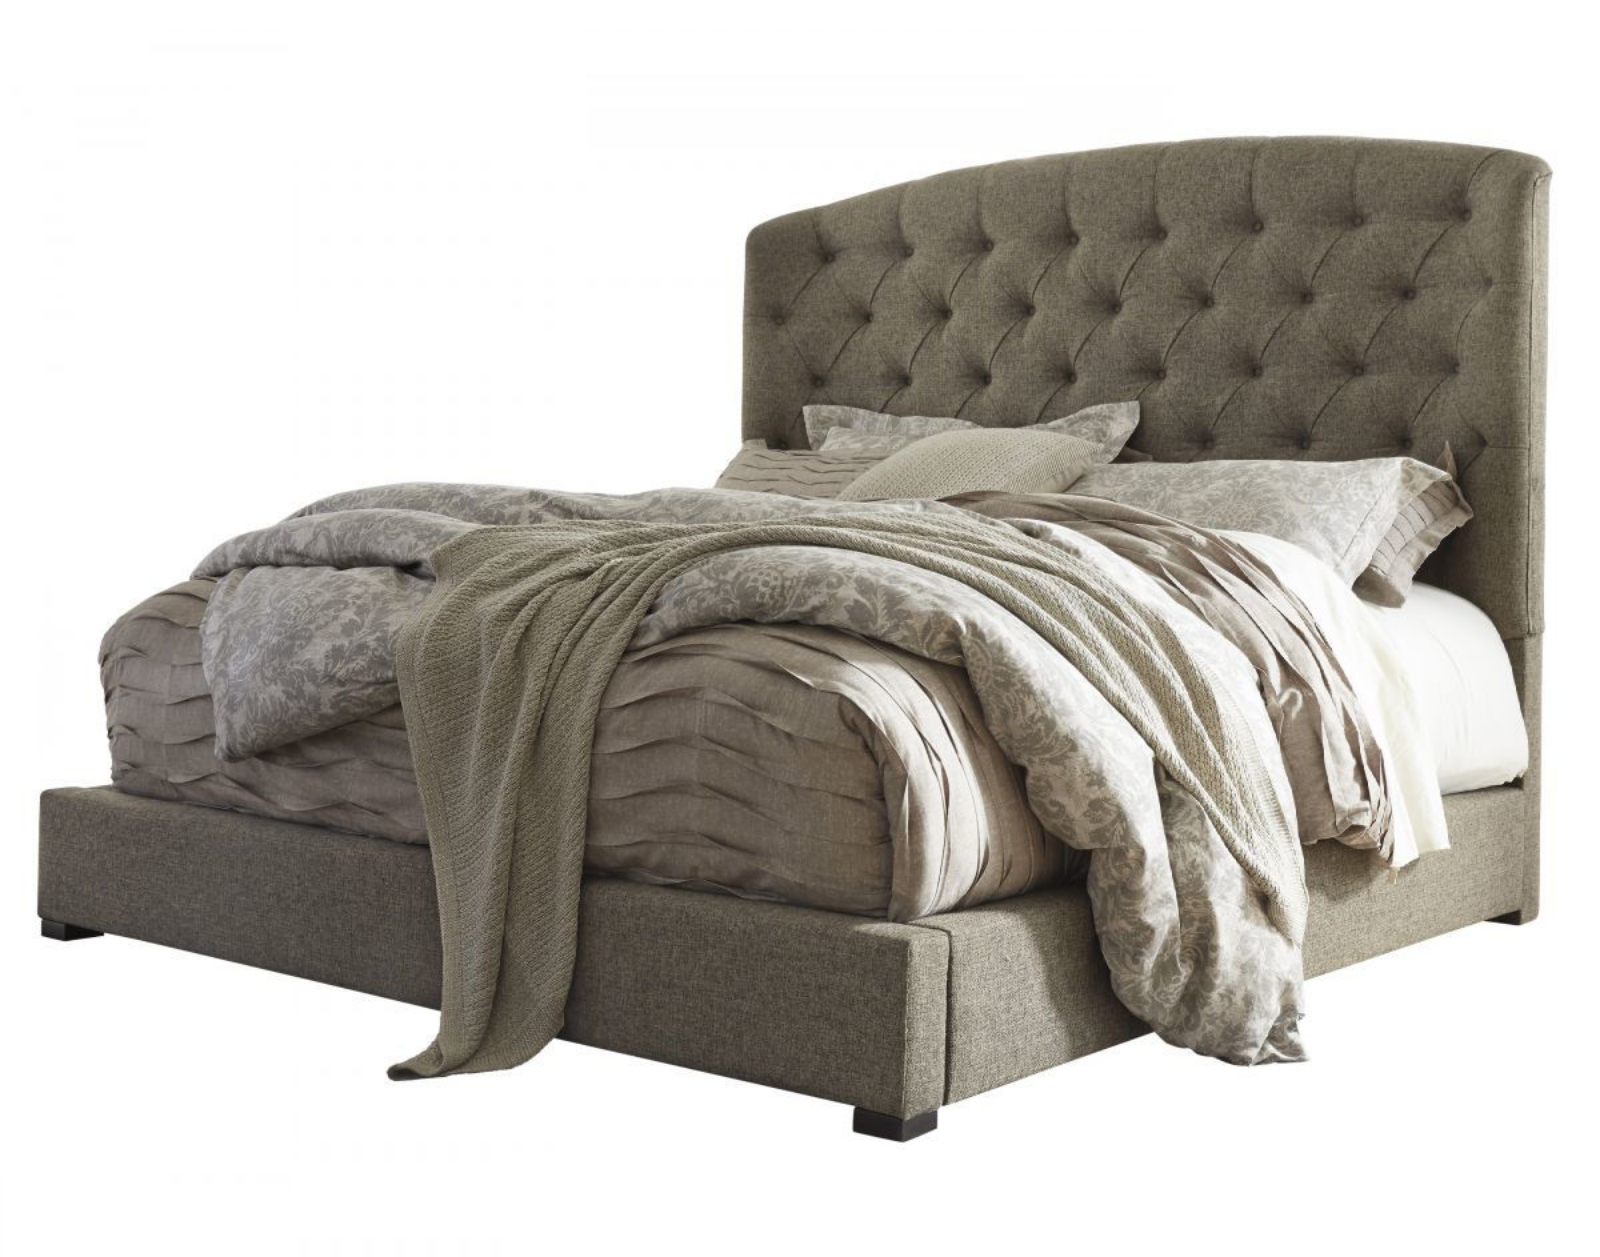 Picture of Gerlane Queen Size Bed